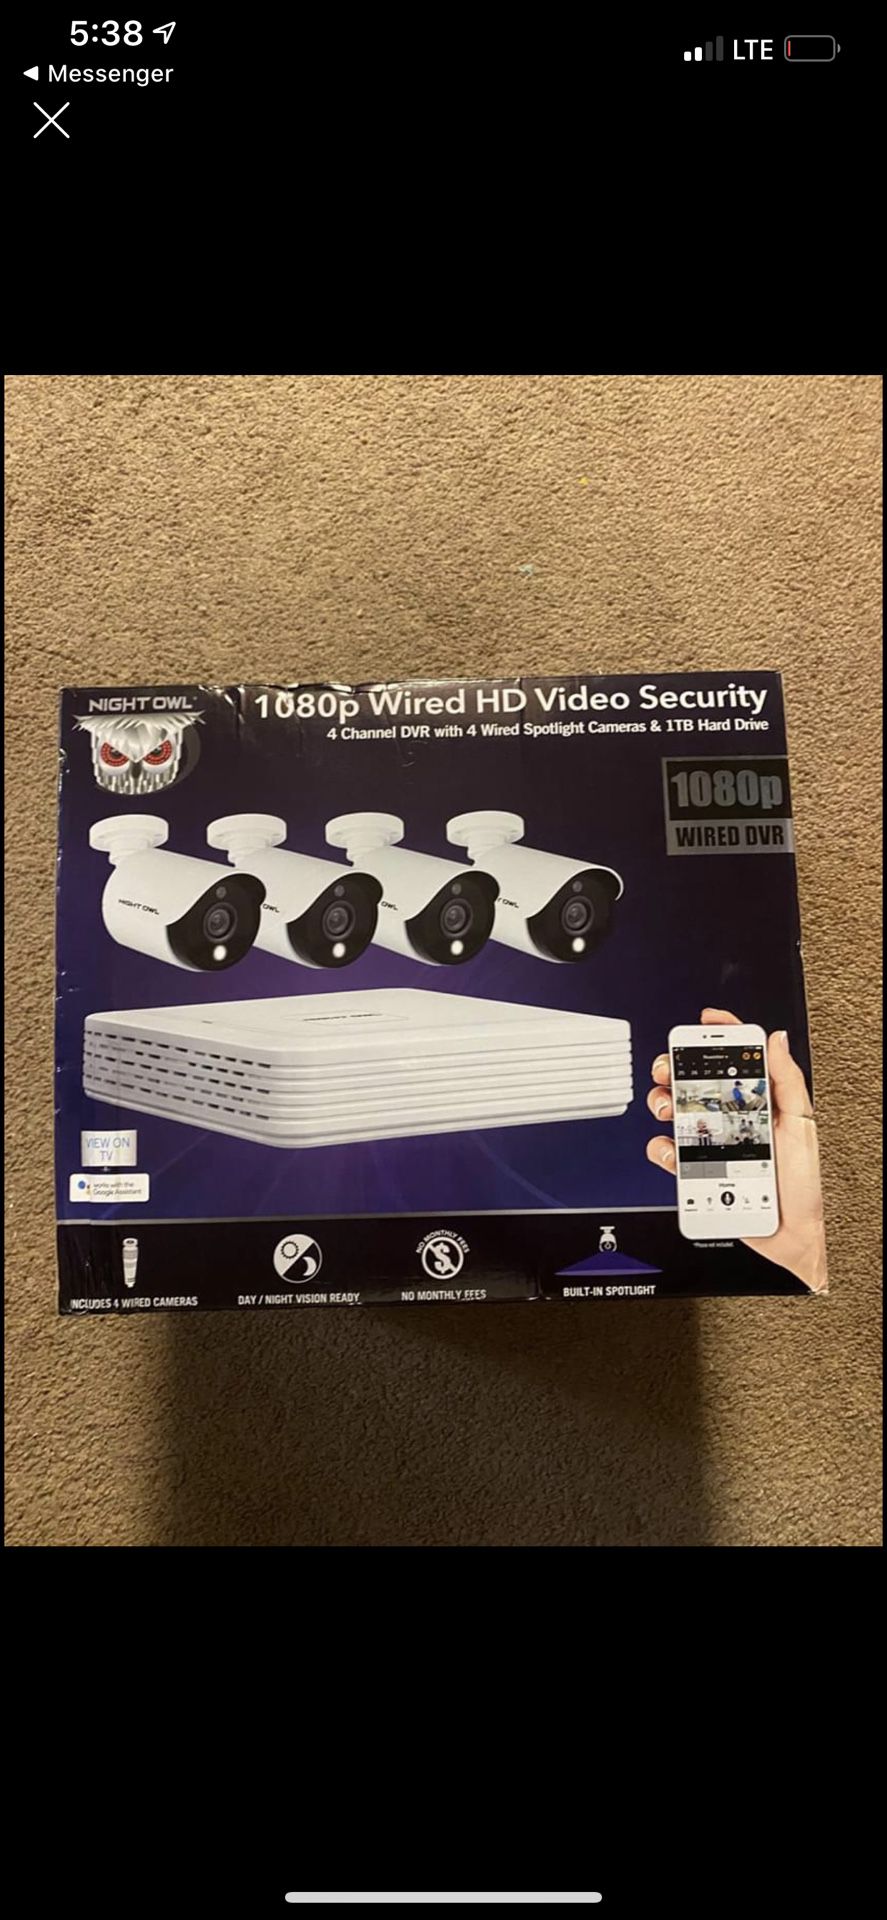 Night owl 1080p wired HD video security.